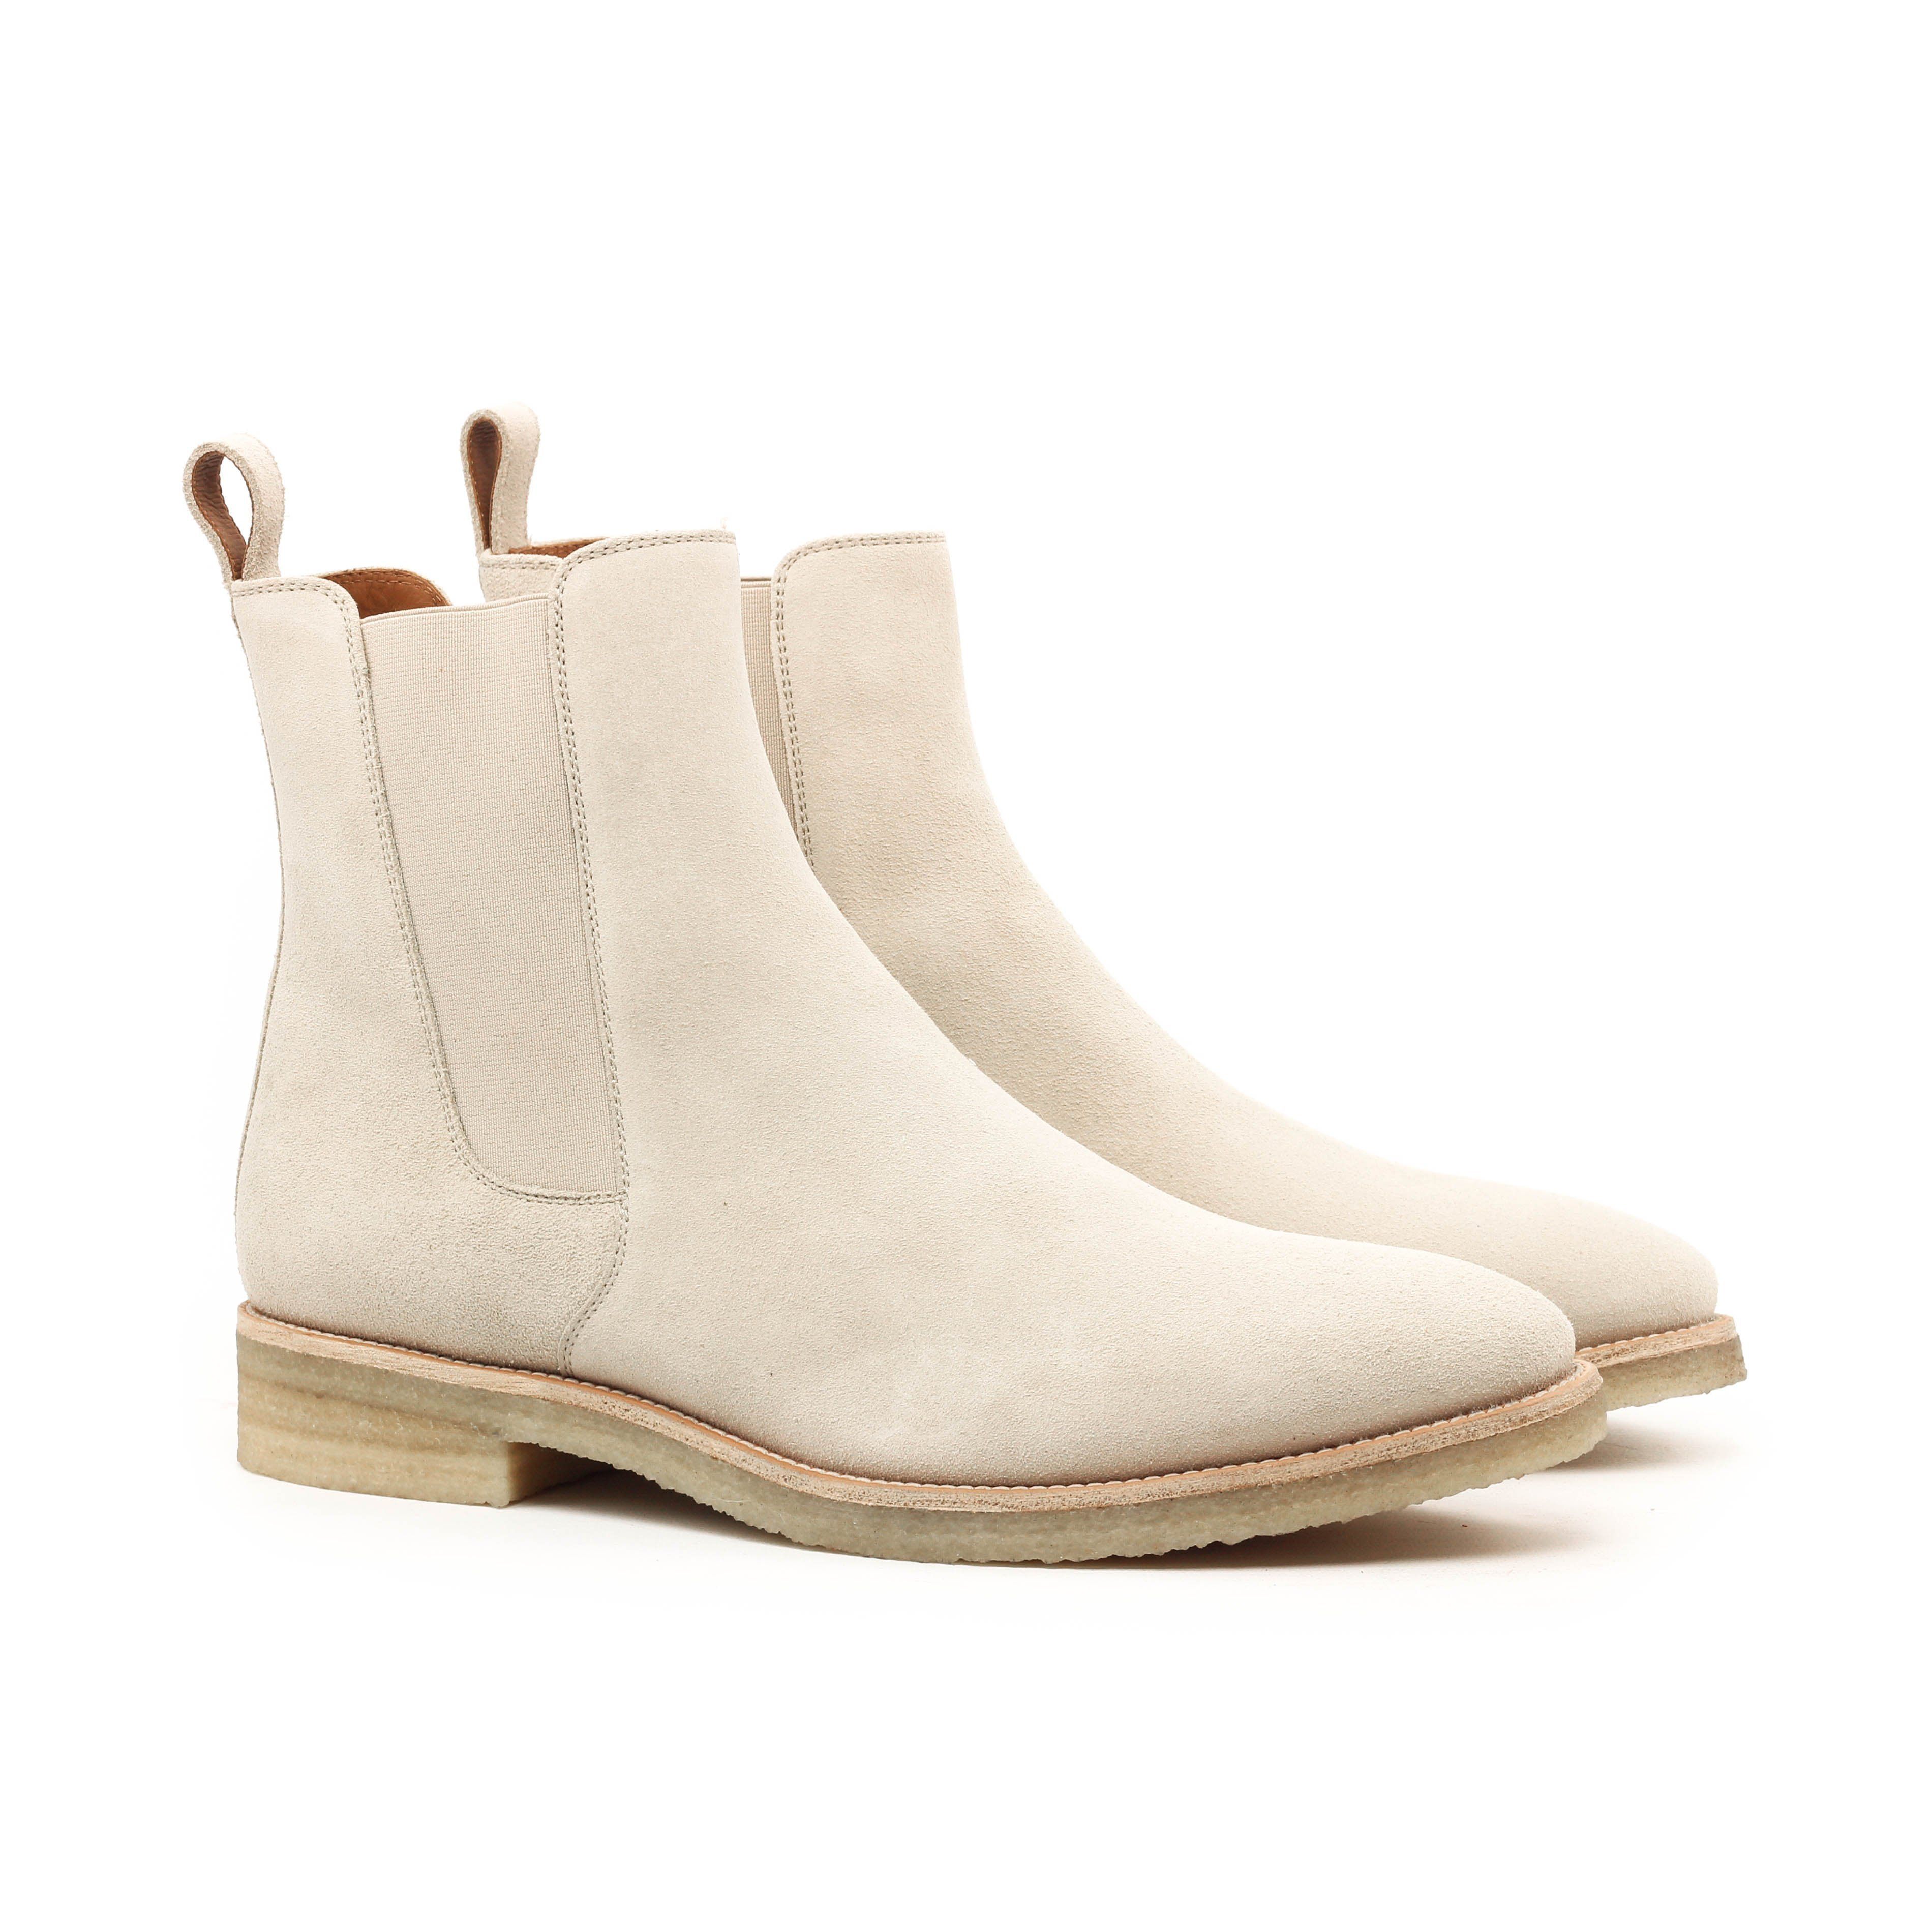 THE SAND CREPE CHELSEA BOOTS | shoes | Pinterest | Crepes and Chelsea